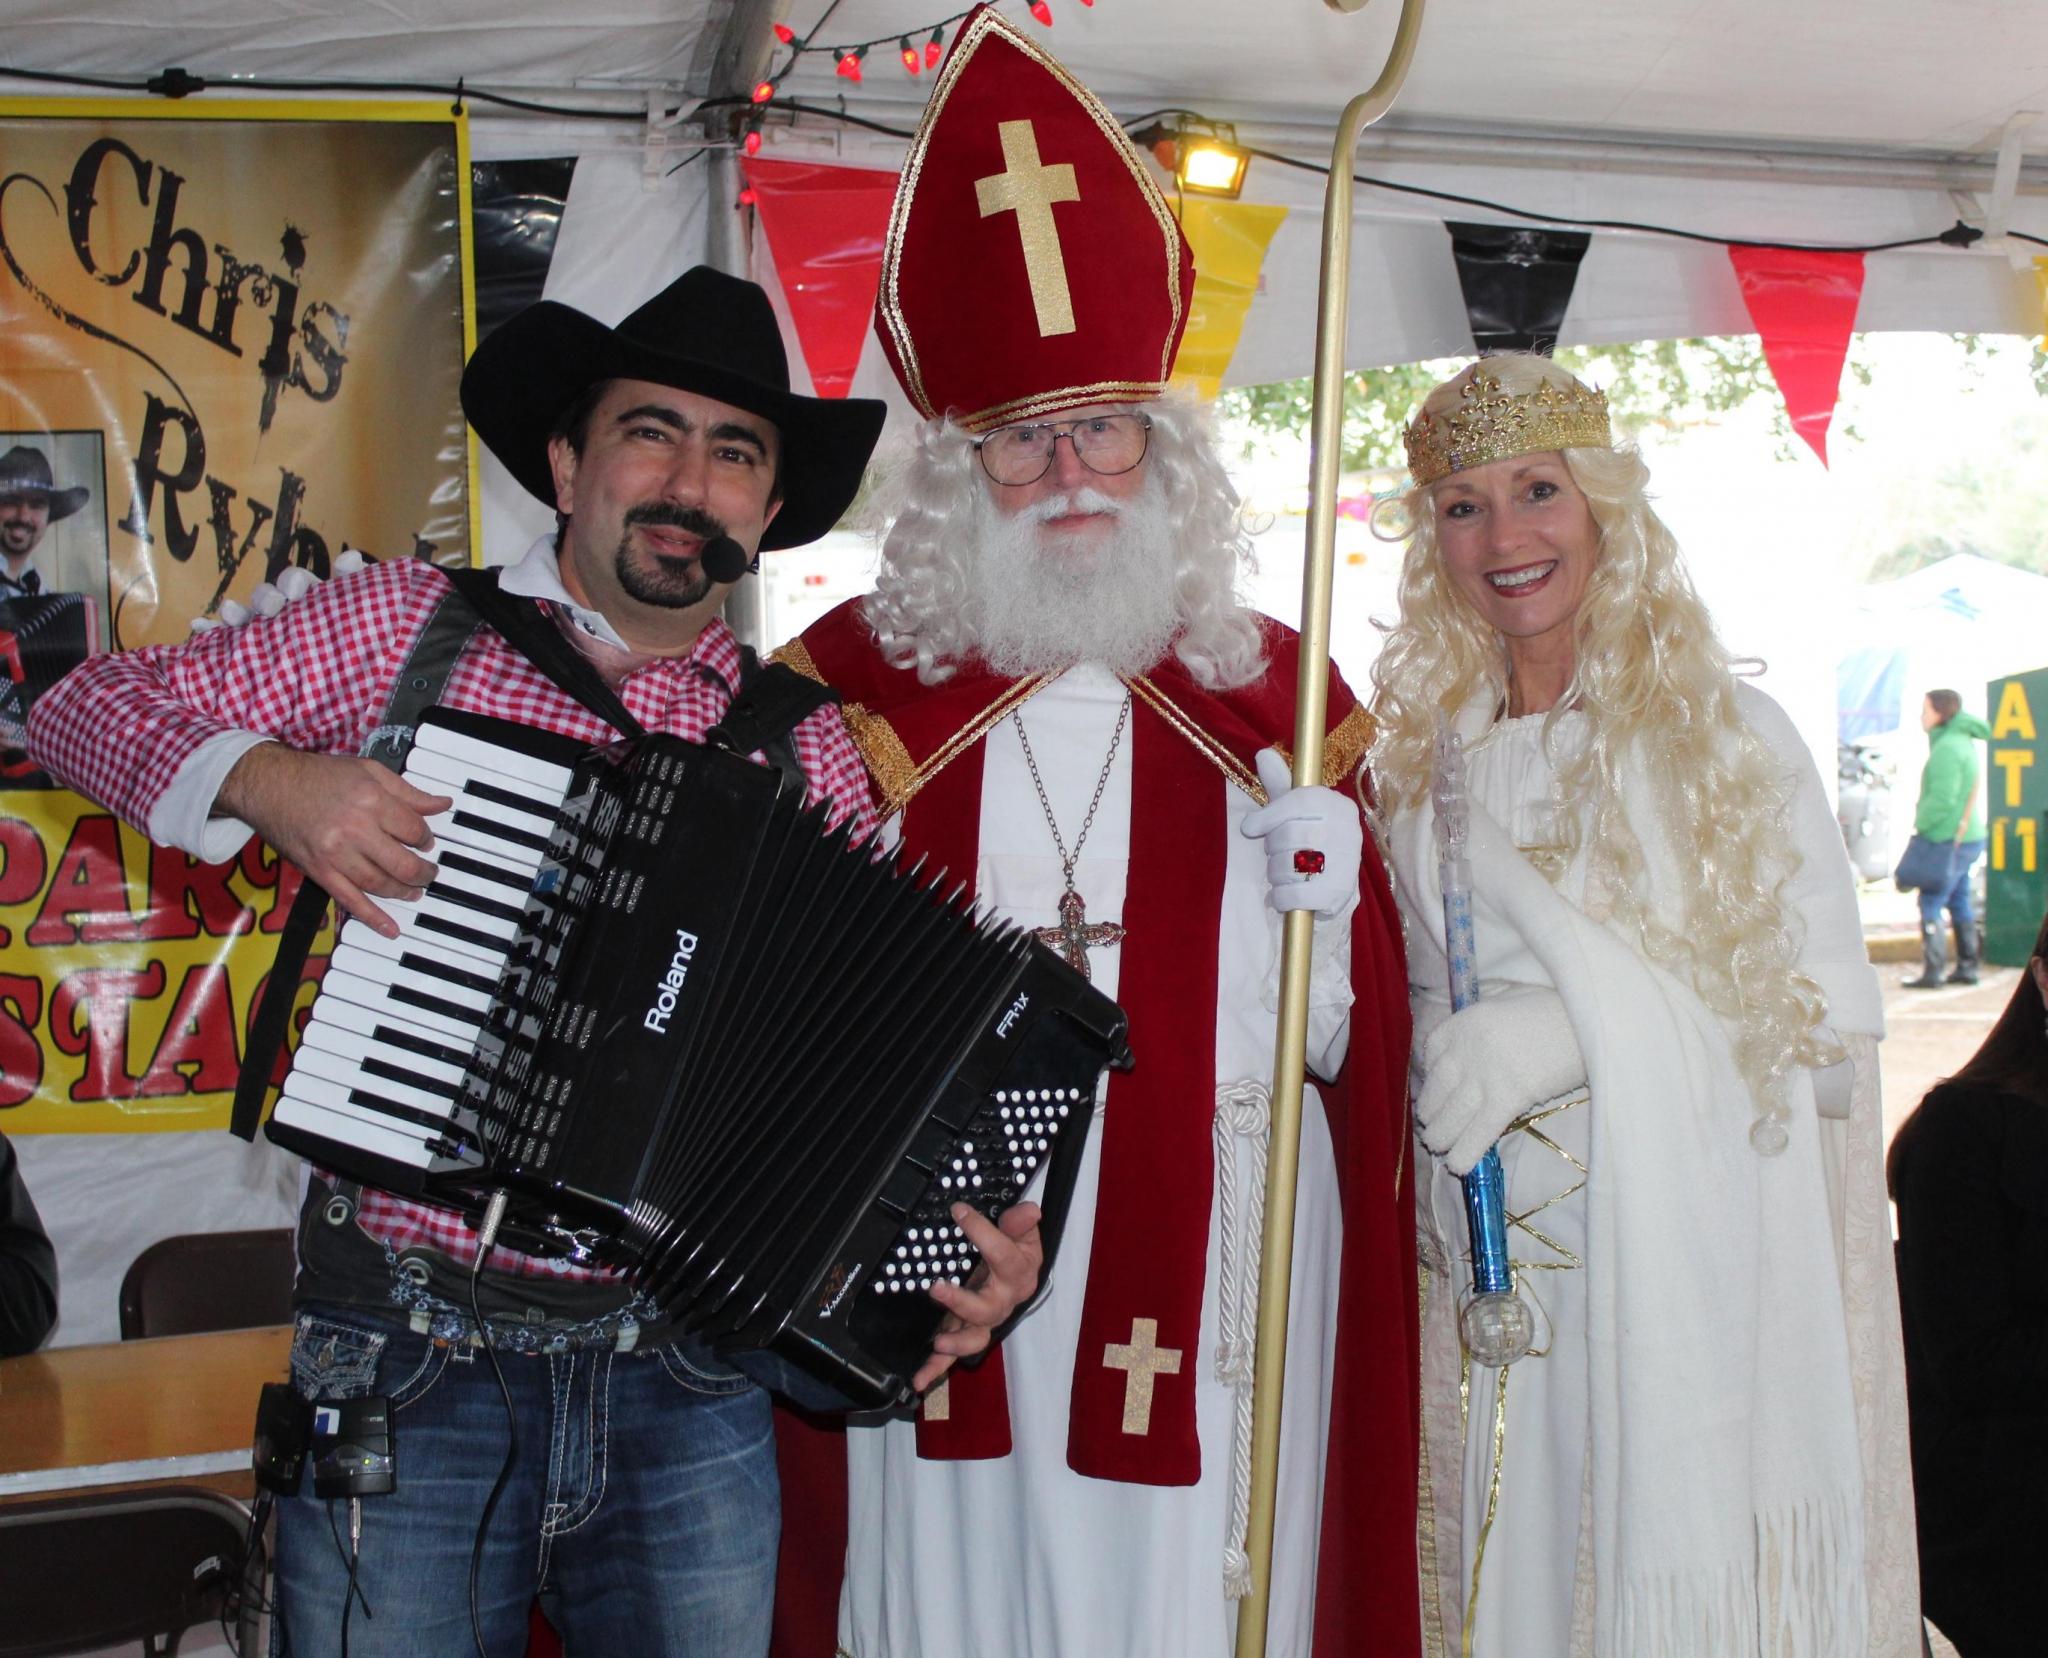 Tomball Invites You to a German Weihnachtsmarkt, Texas Style Texas